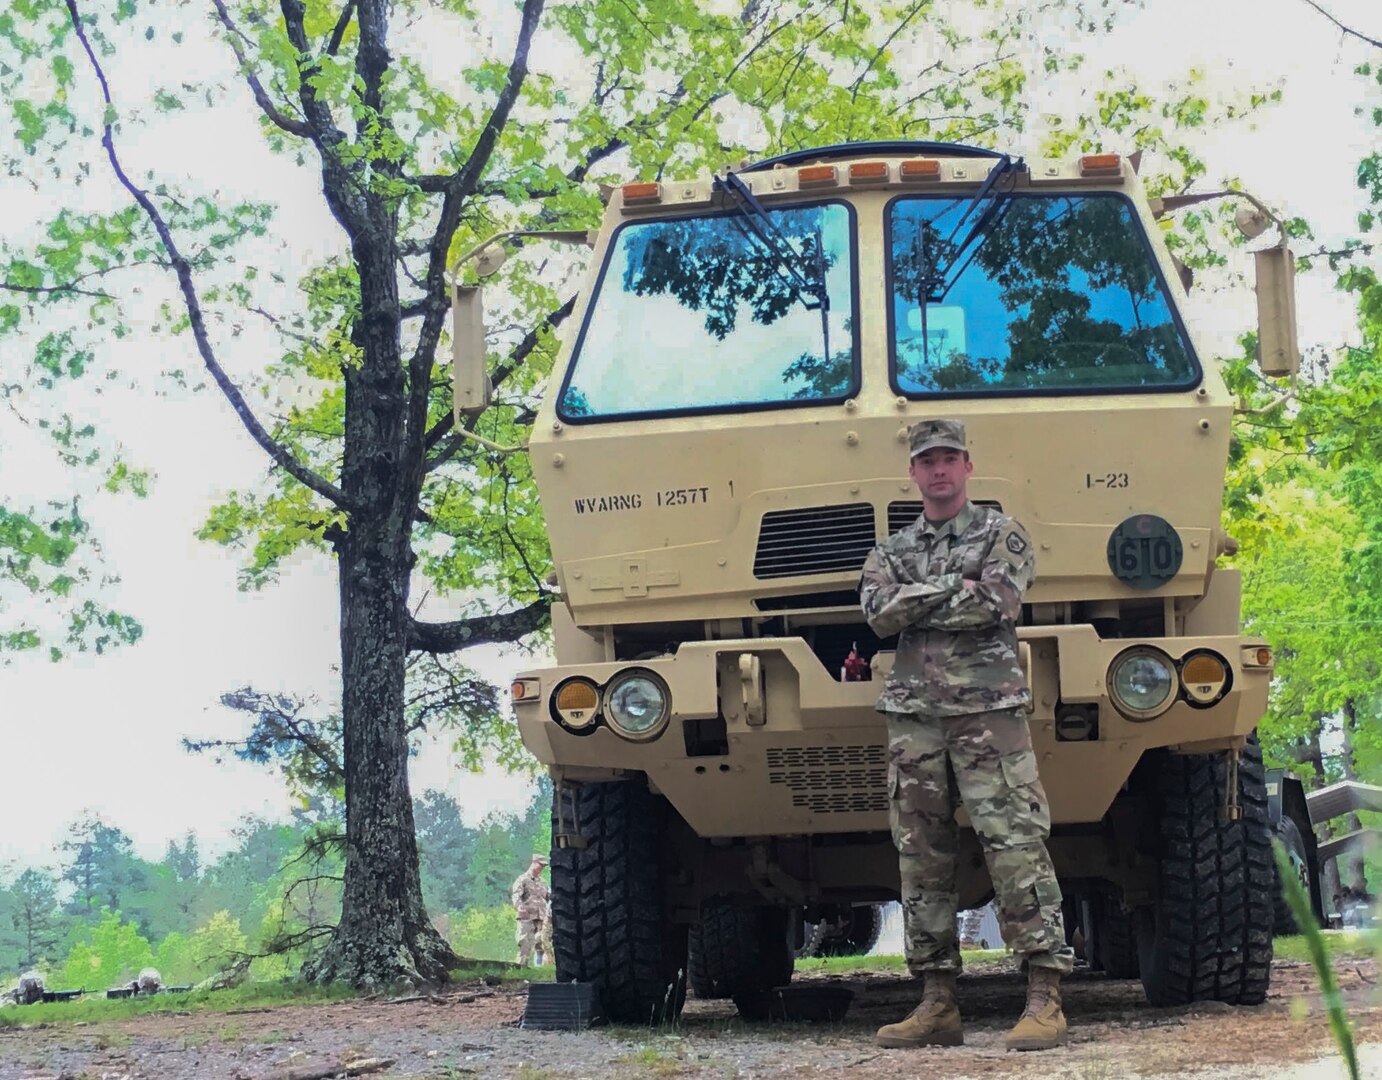 Sgt. Jacob Mason, a motor vehicle operator with the 1257th Transportation Company, poses for a photo in front of a vehicle he operates. Mason was selected as the West Virginia Army National Guard's Soldier Spotlight for April. (Courtesy Photo)